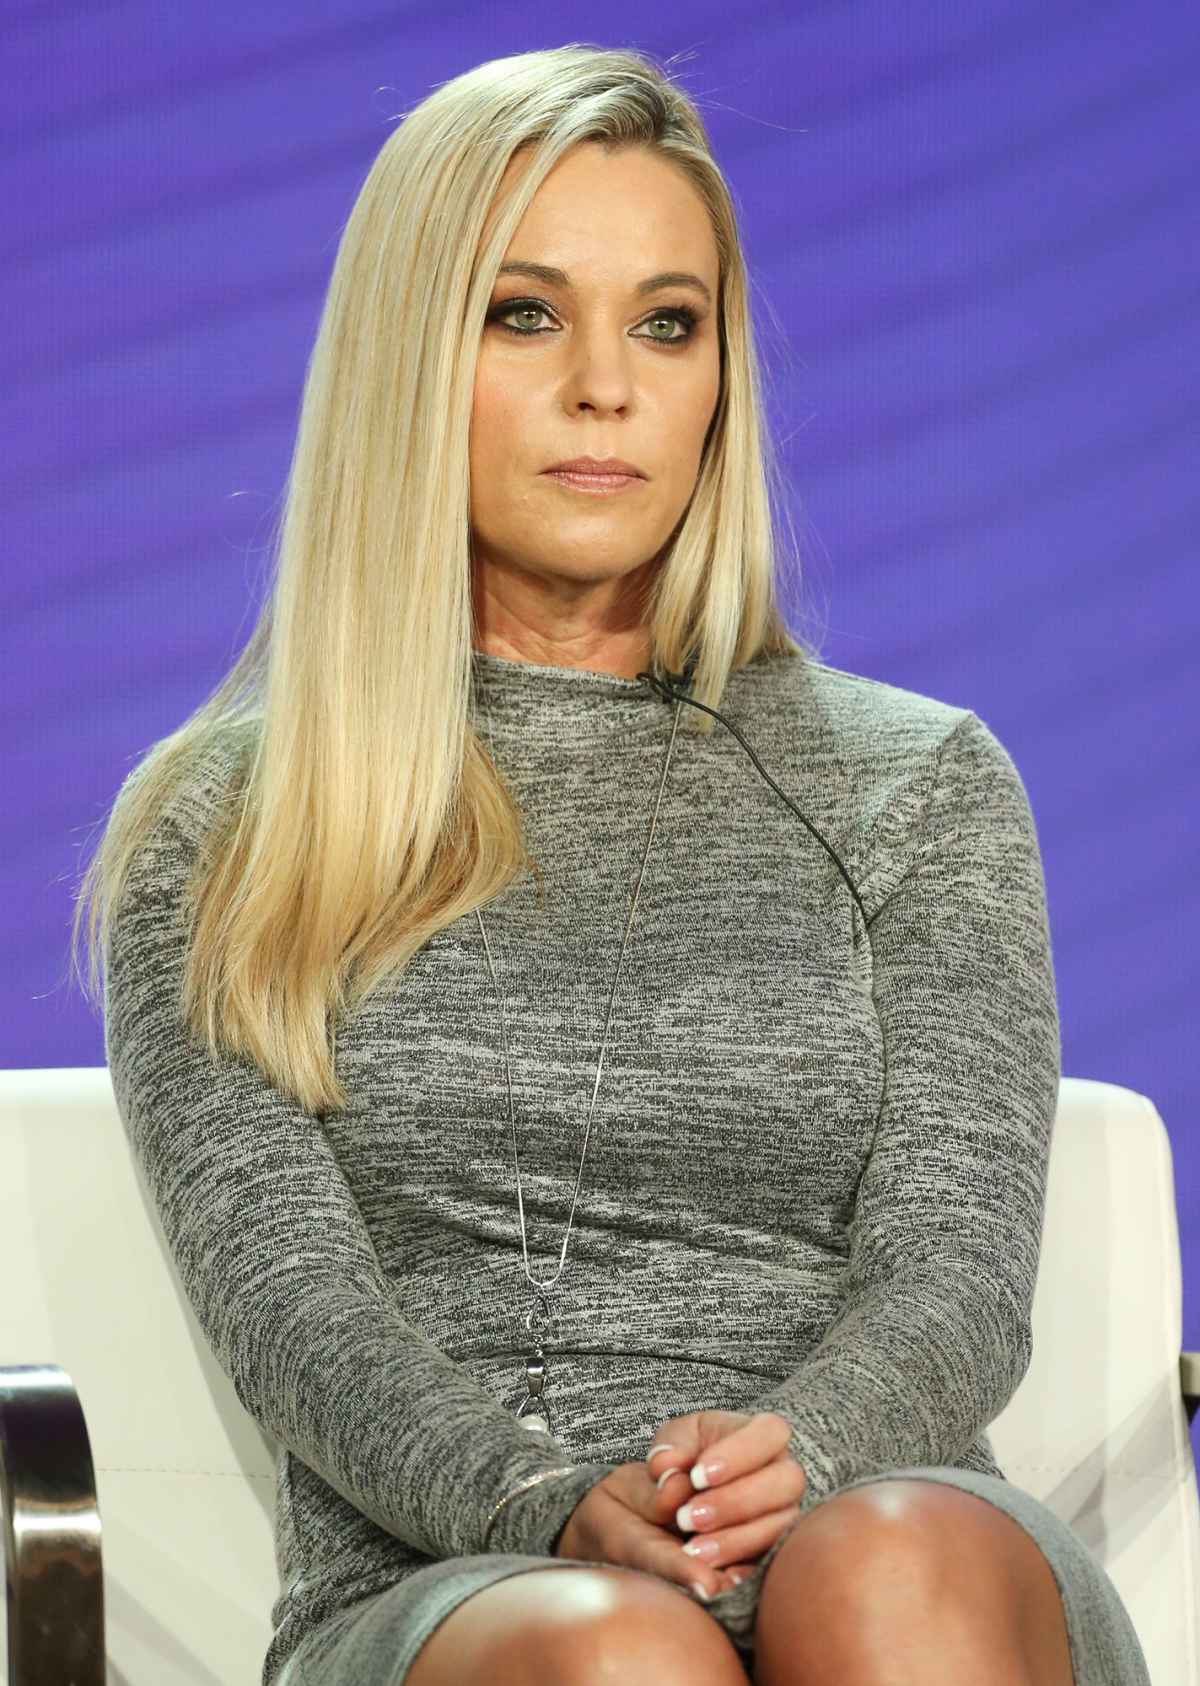 arv Senatet salami Kate Gosselin in Legal Trouble After Continuing to Film With Kids